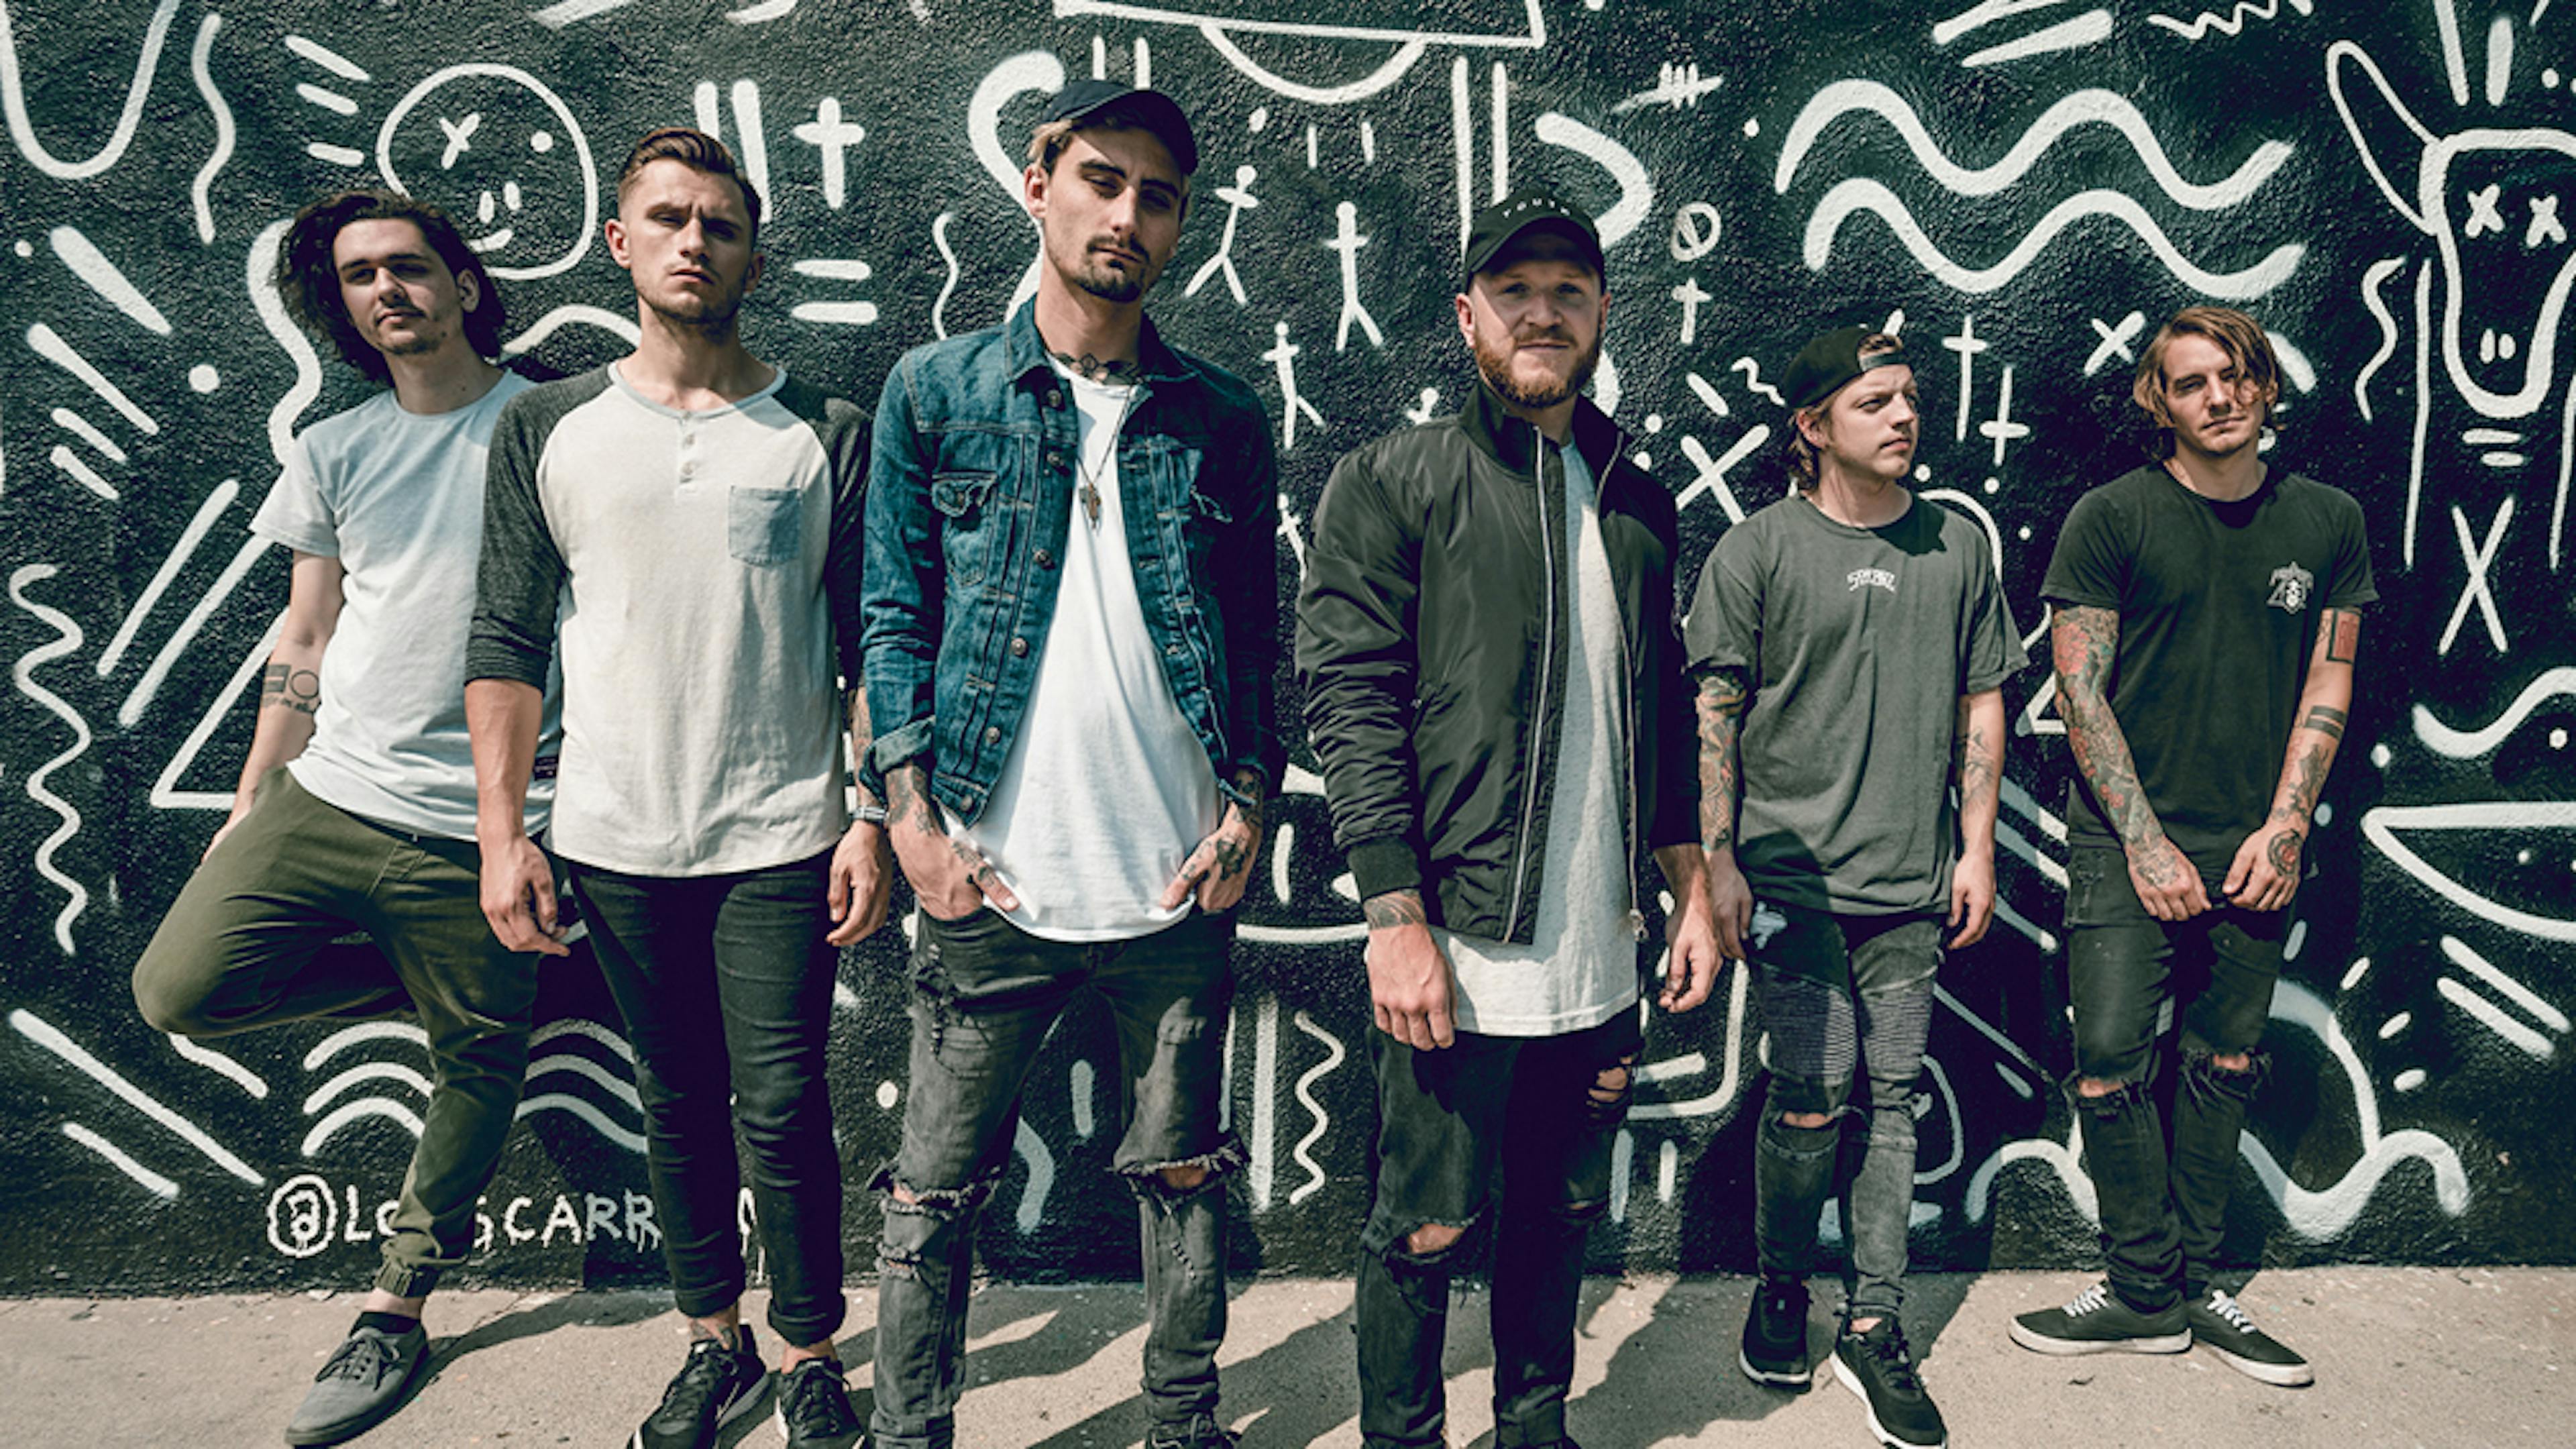 We Came As Romans Band Members Pay Tribute To Kyle Pavone